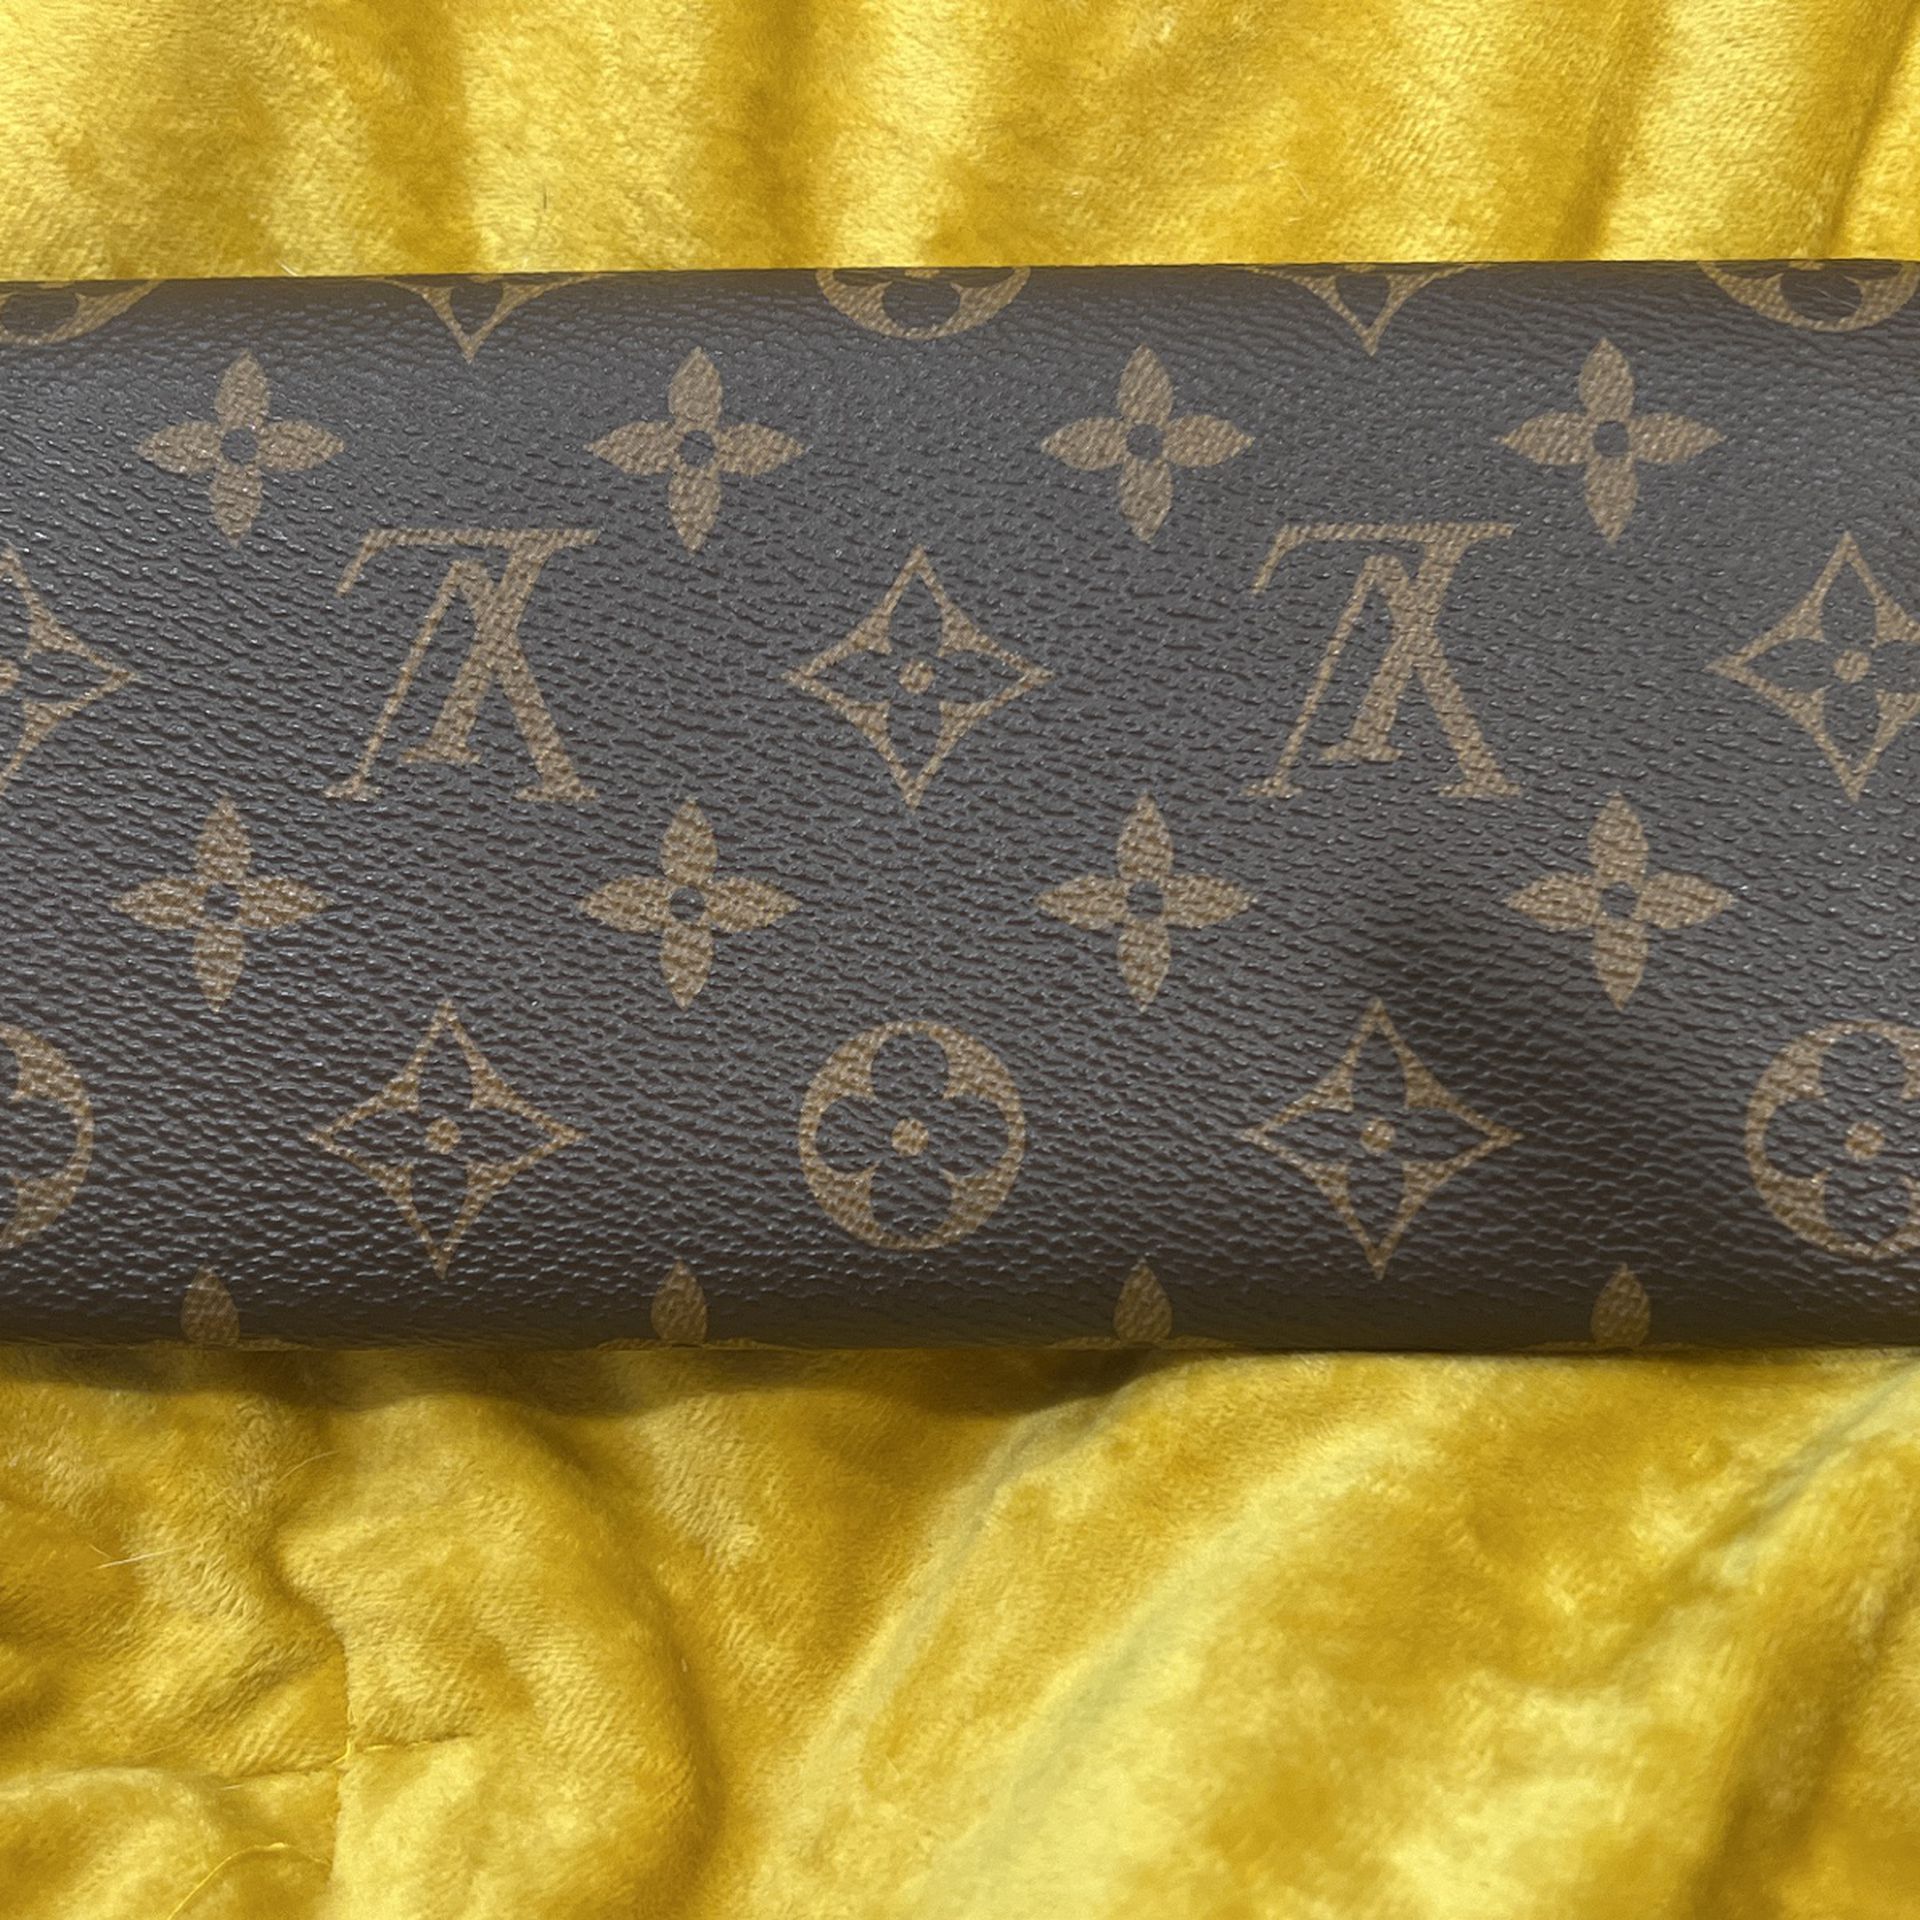 Louis Vuitton Wallet - See Receipt From fashion Island LV store for ...